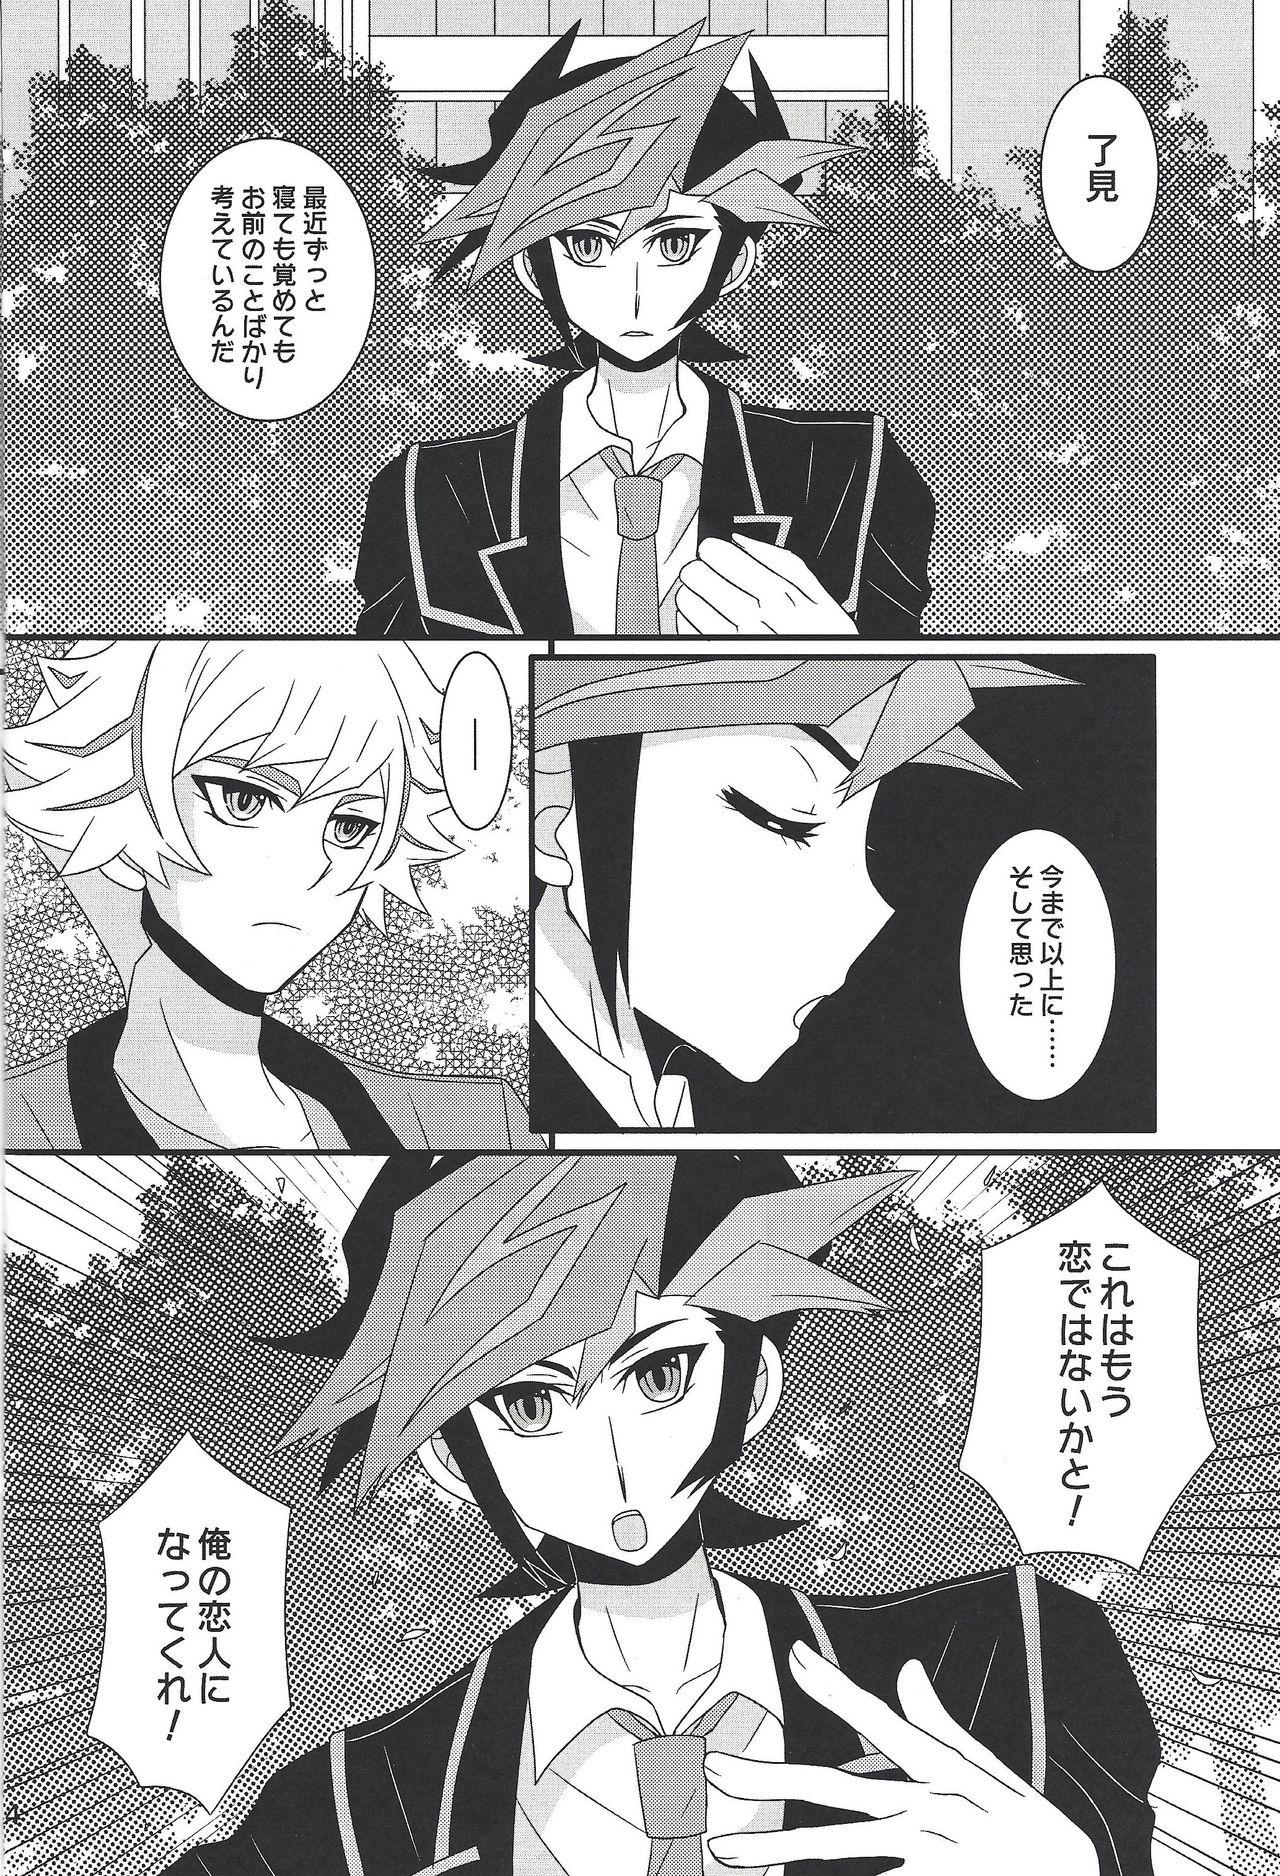 Celebrities Furious Lovers - Yu gi oh vrains Francaise - Page 3